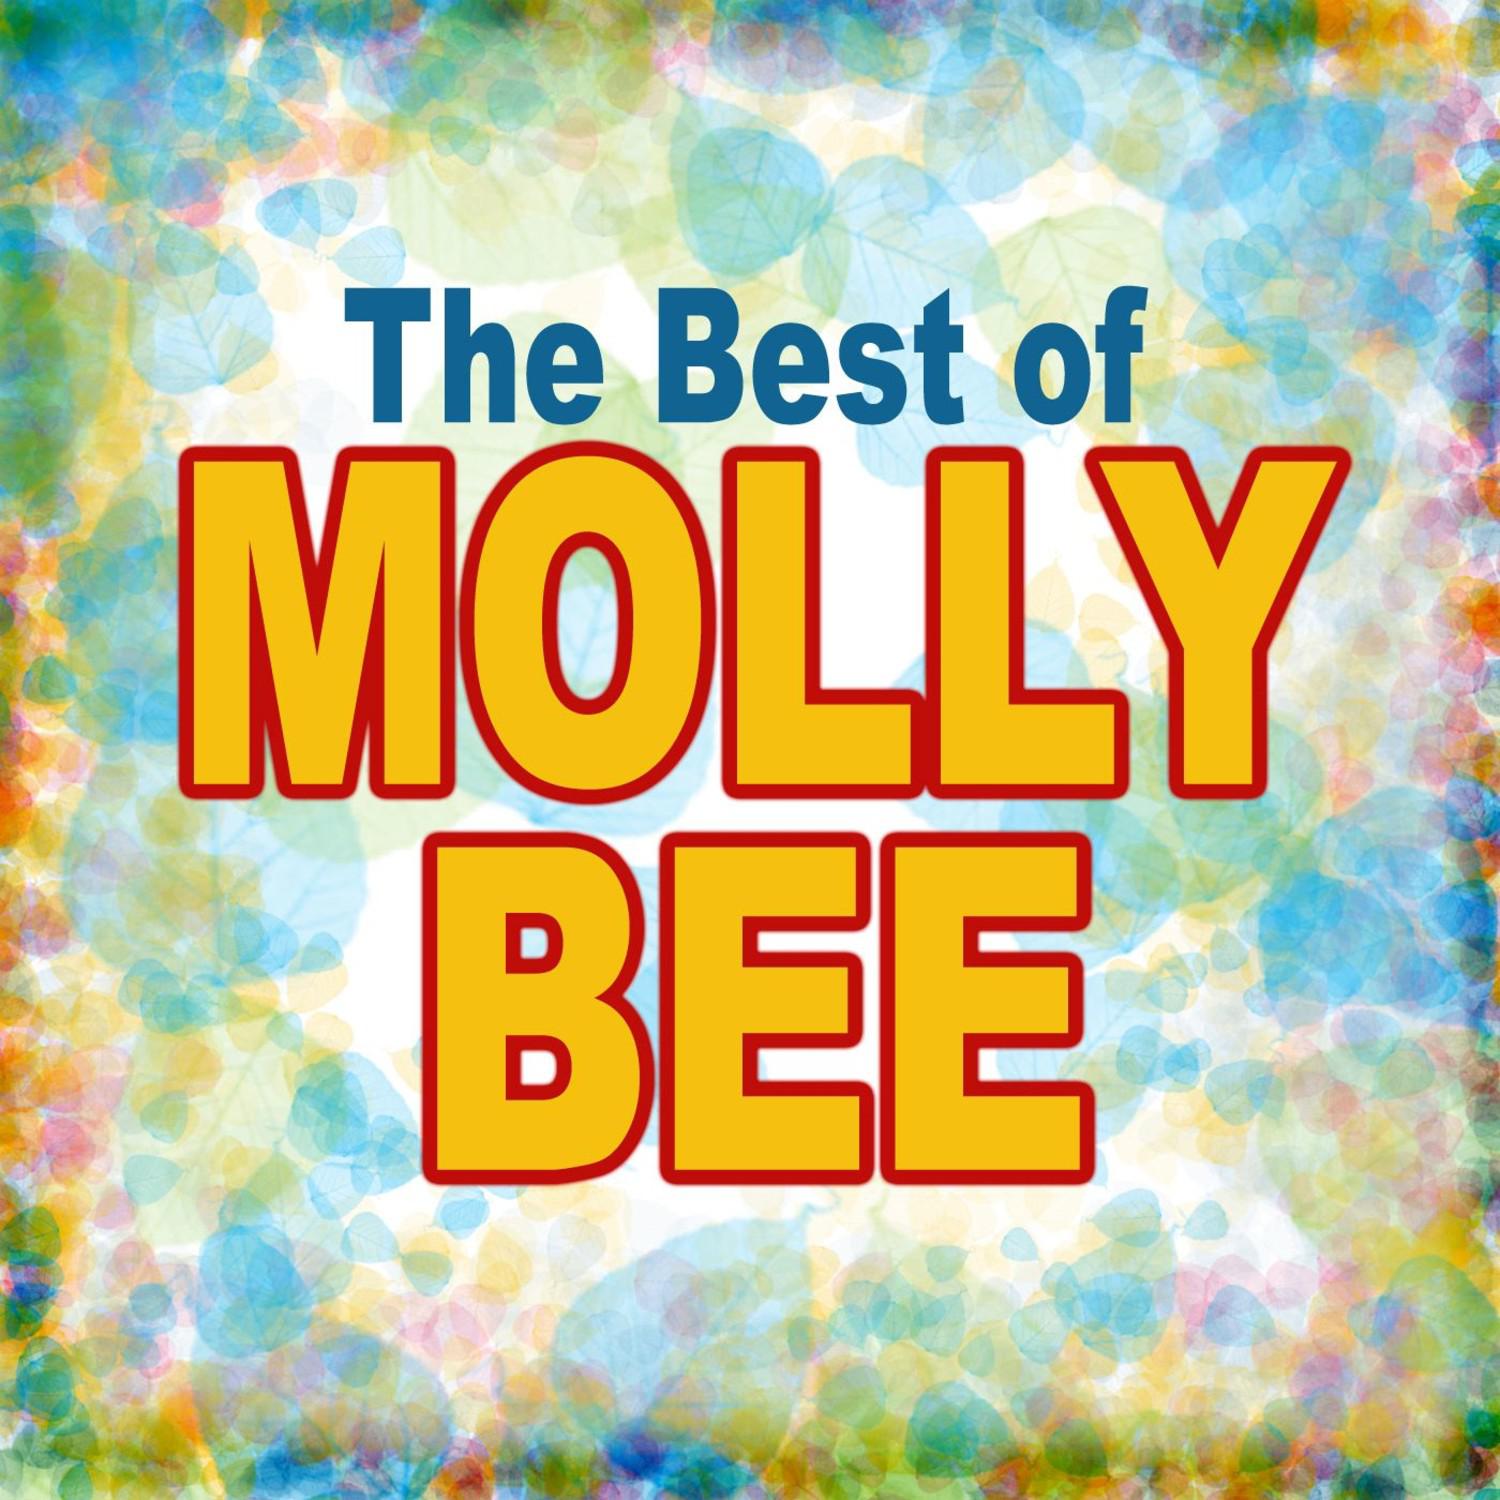 The Best Of Molly Bee